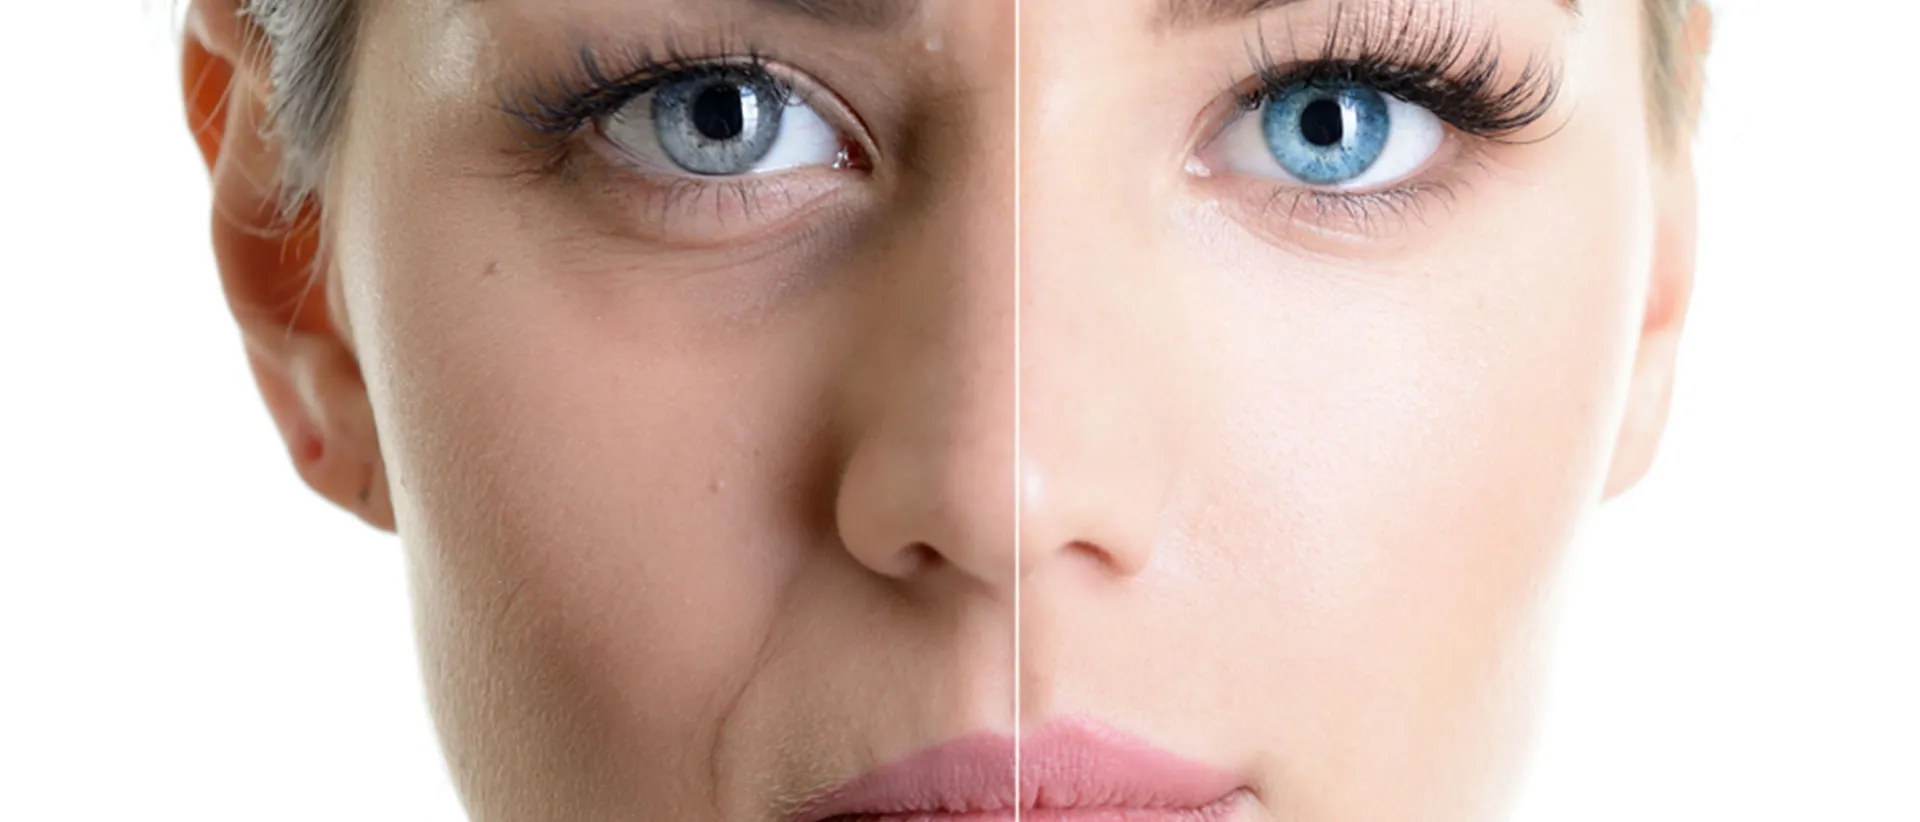 The eyeballs, eyelashes, nose, ears, and upper lip of a woman's face split into two halves to portray the benefits of anti aging treatment in Hyderabad.
